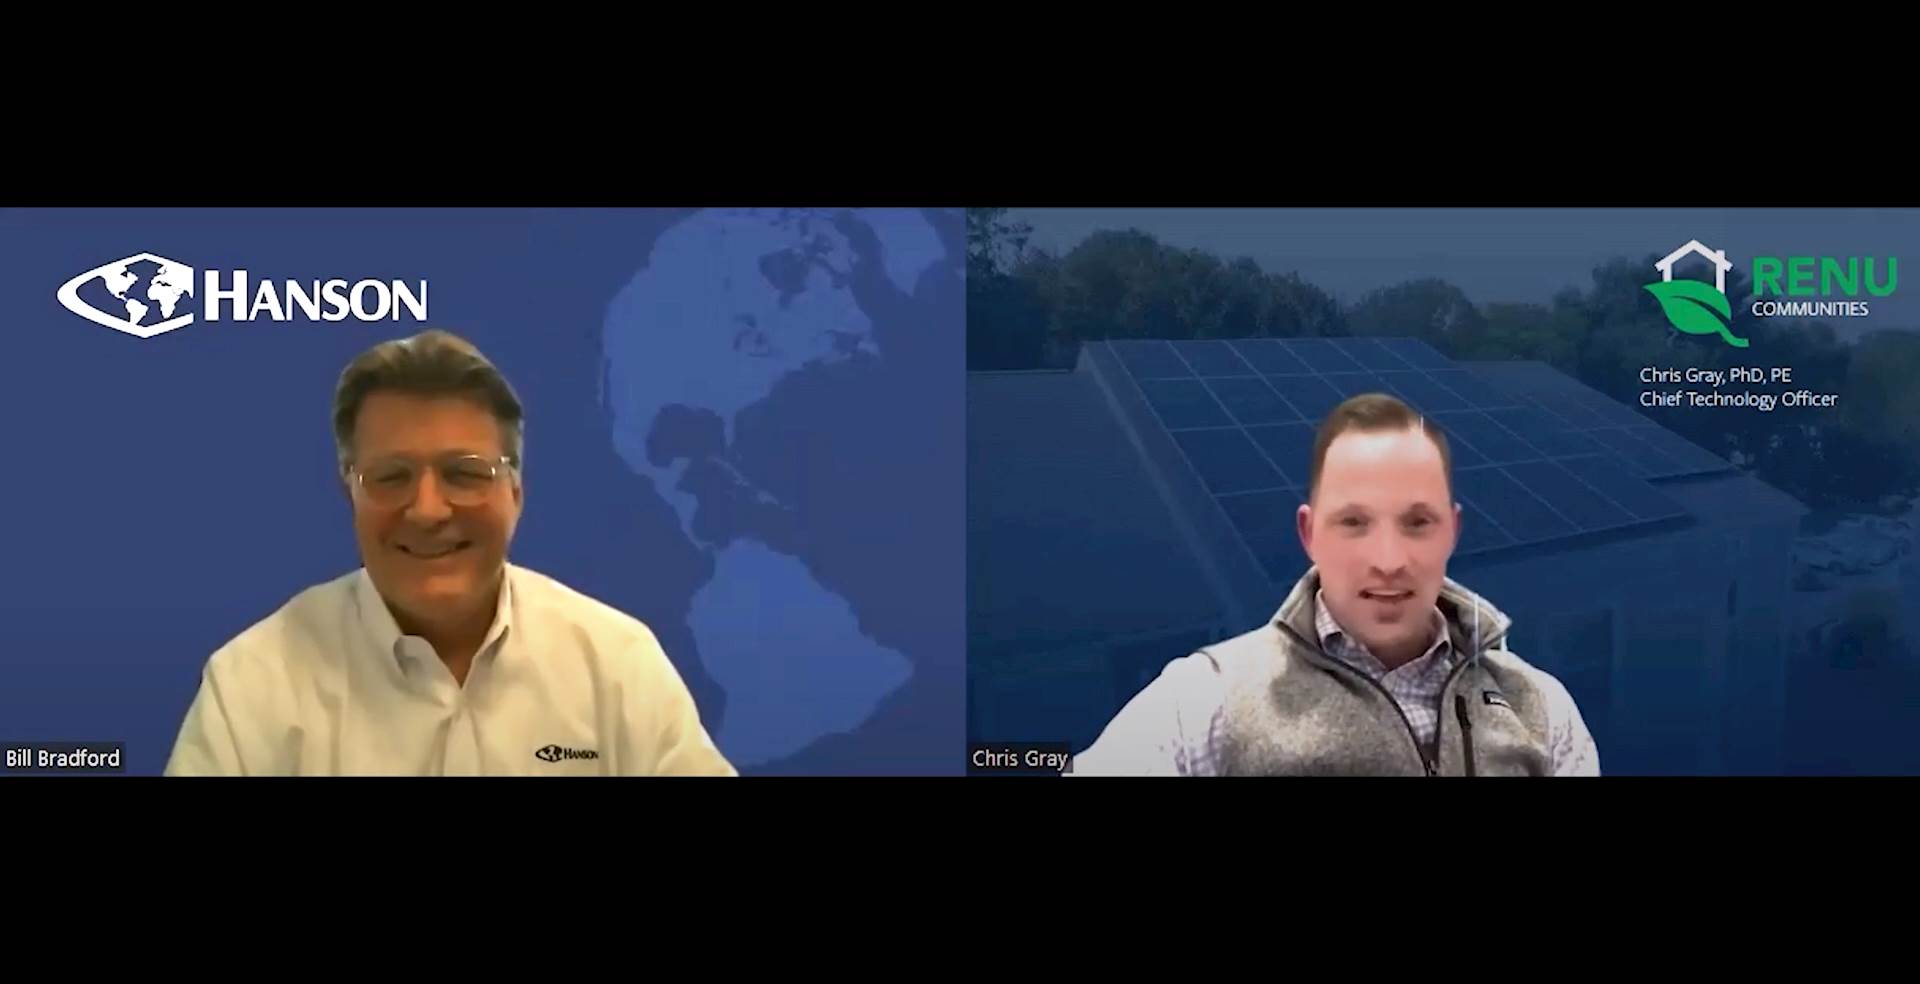 Screenshot from Discussions With Energy Leaders that shows Bill Bradford sharing a laugh with Chris Gray